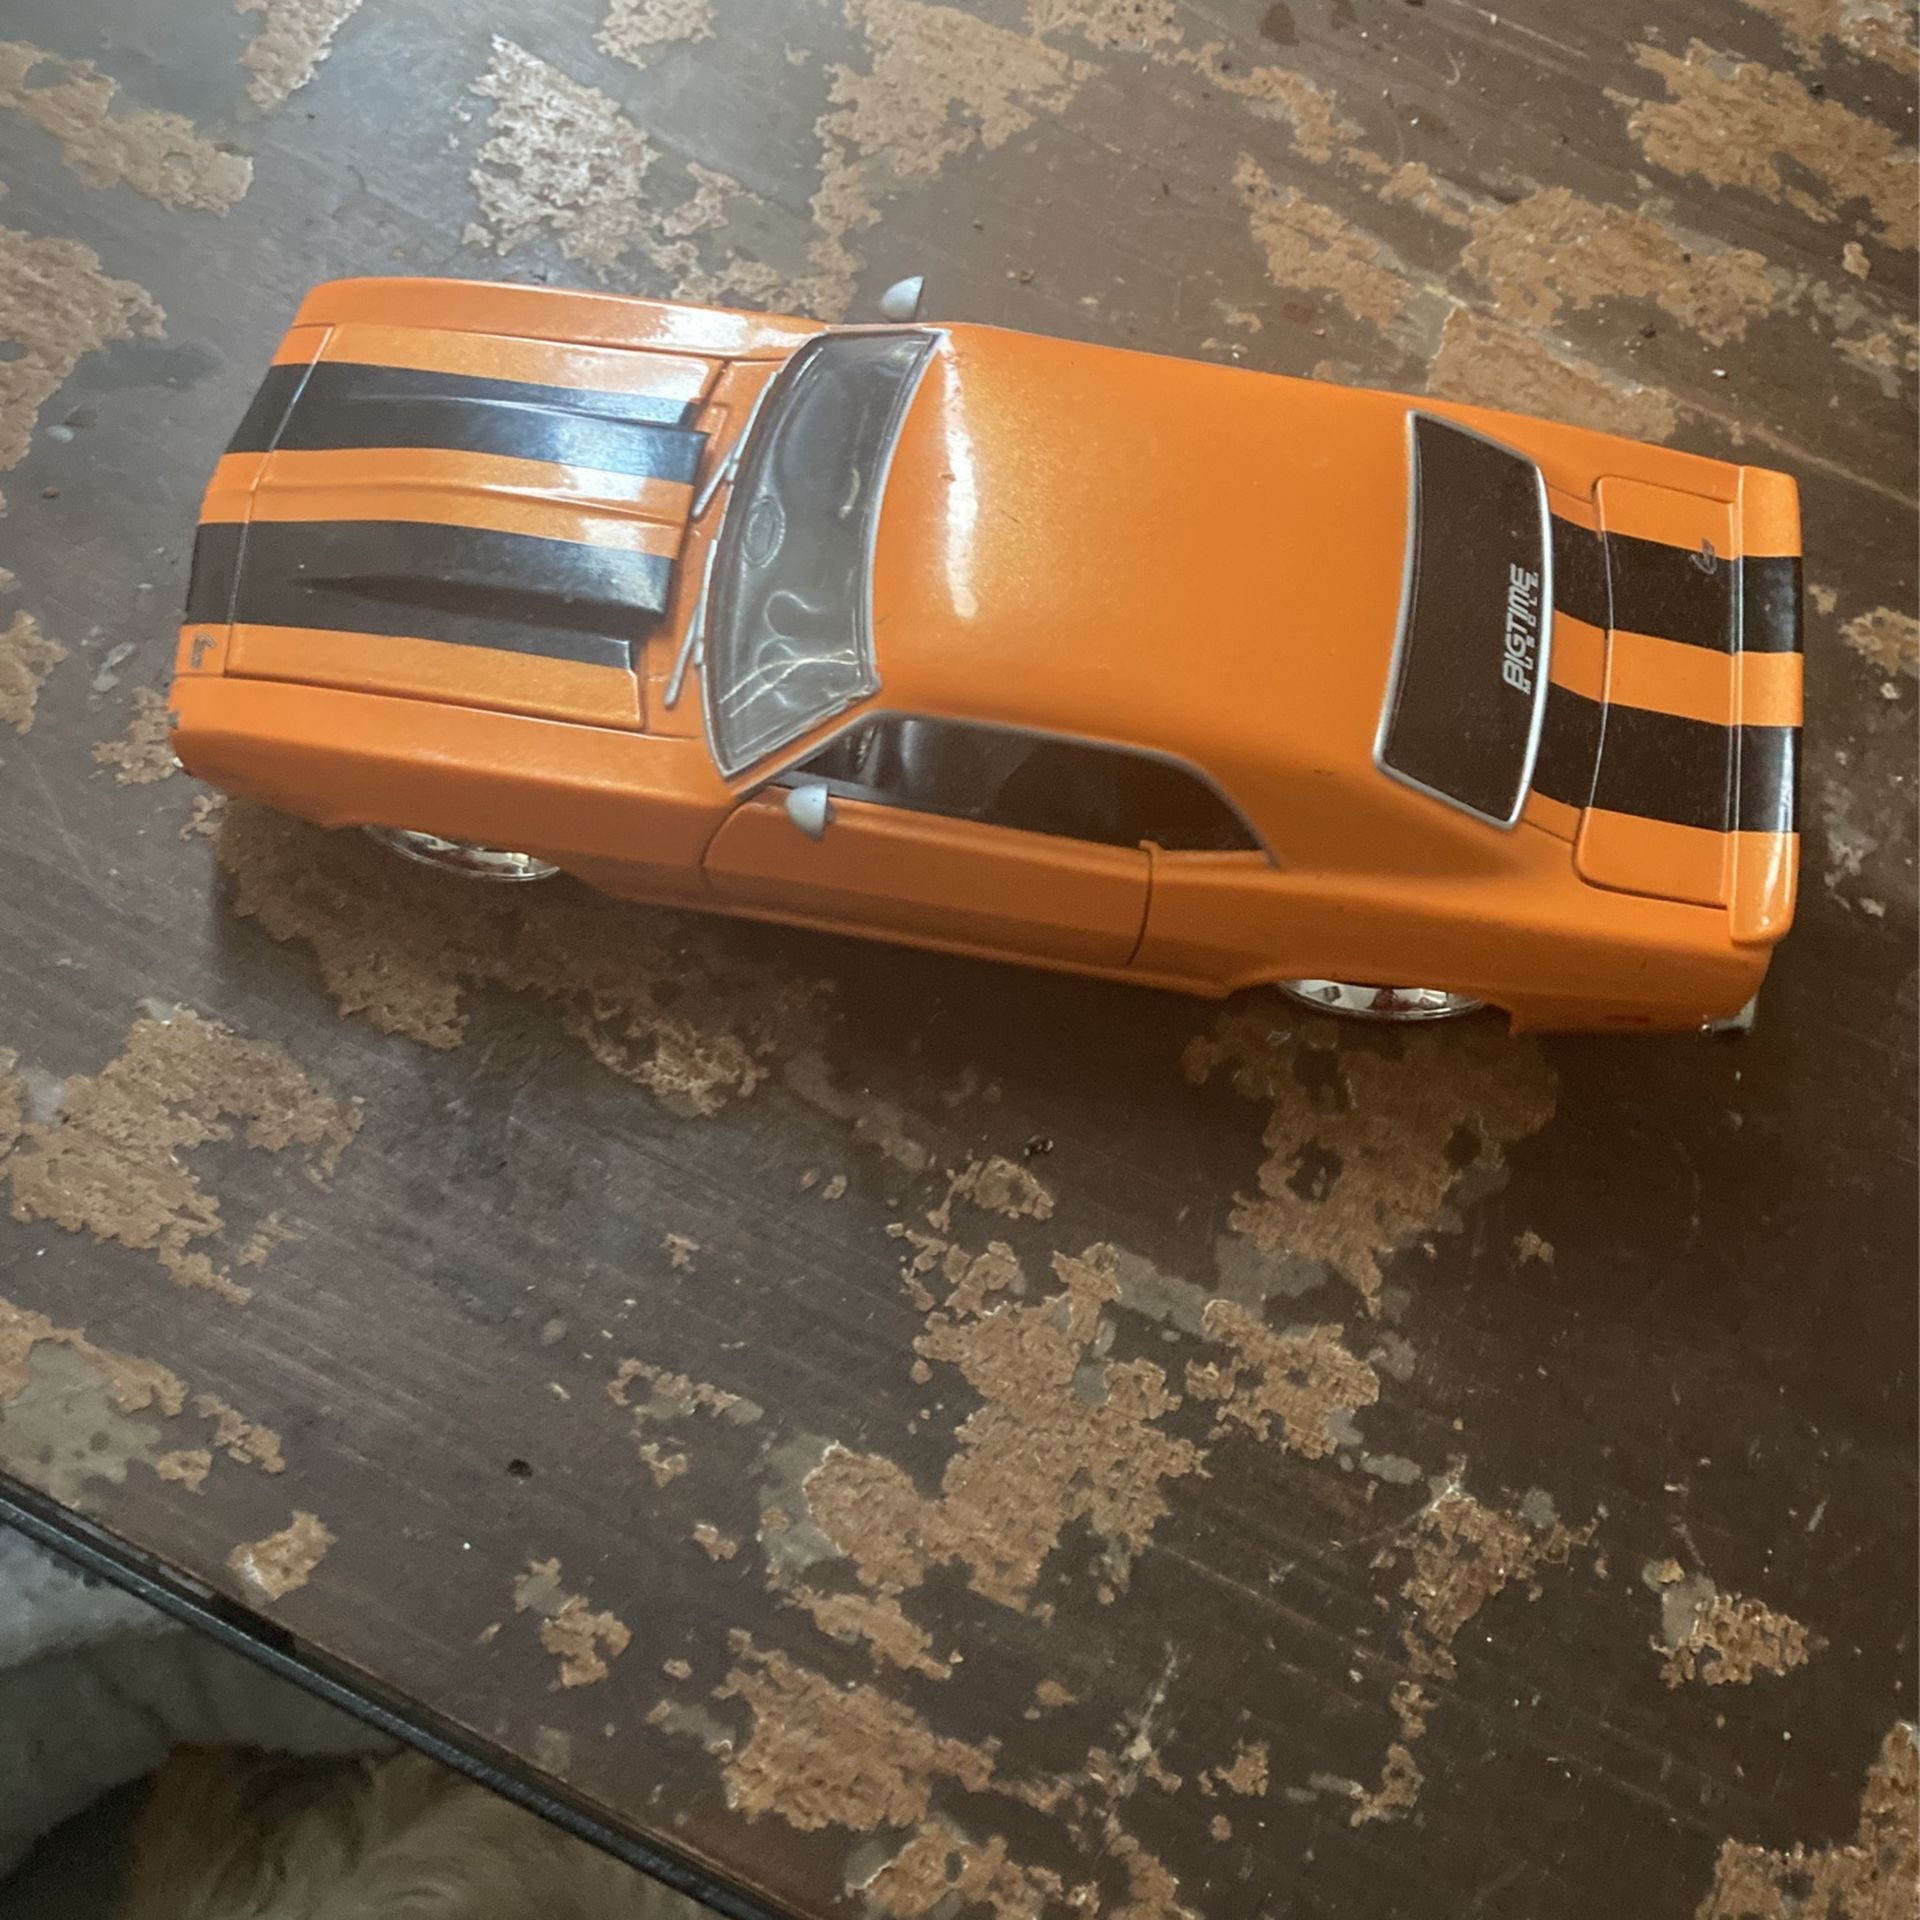 1969 Chevy Camero SS Toy Car Model